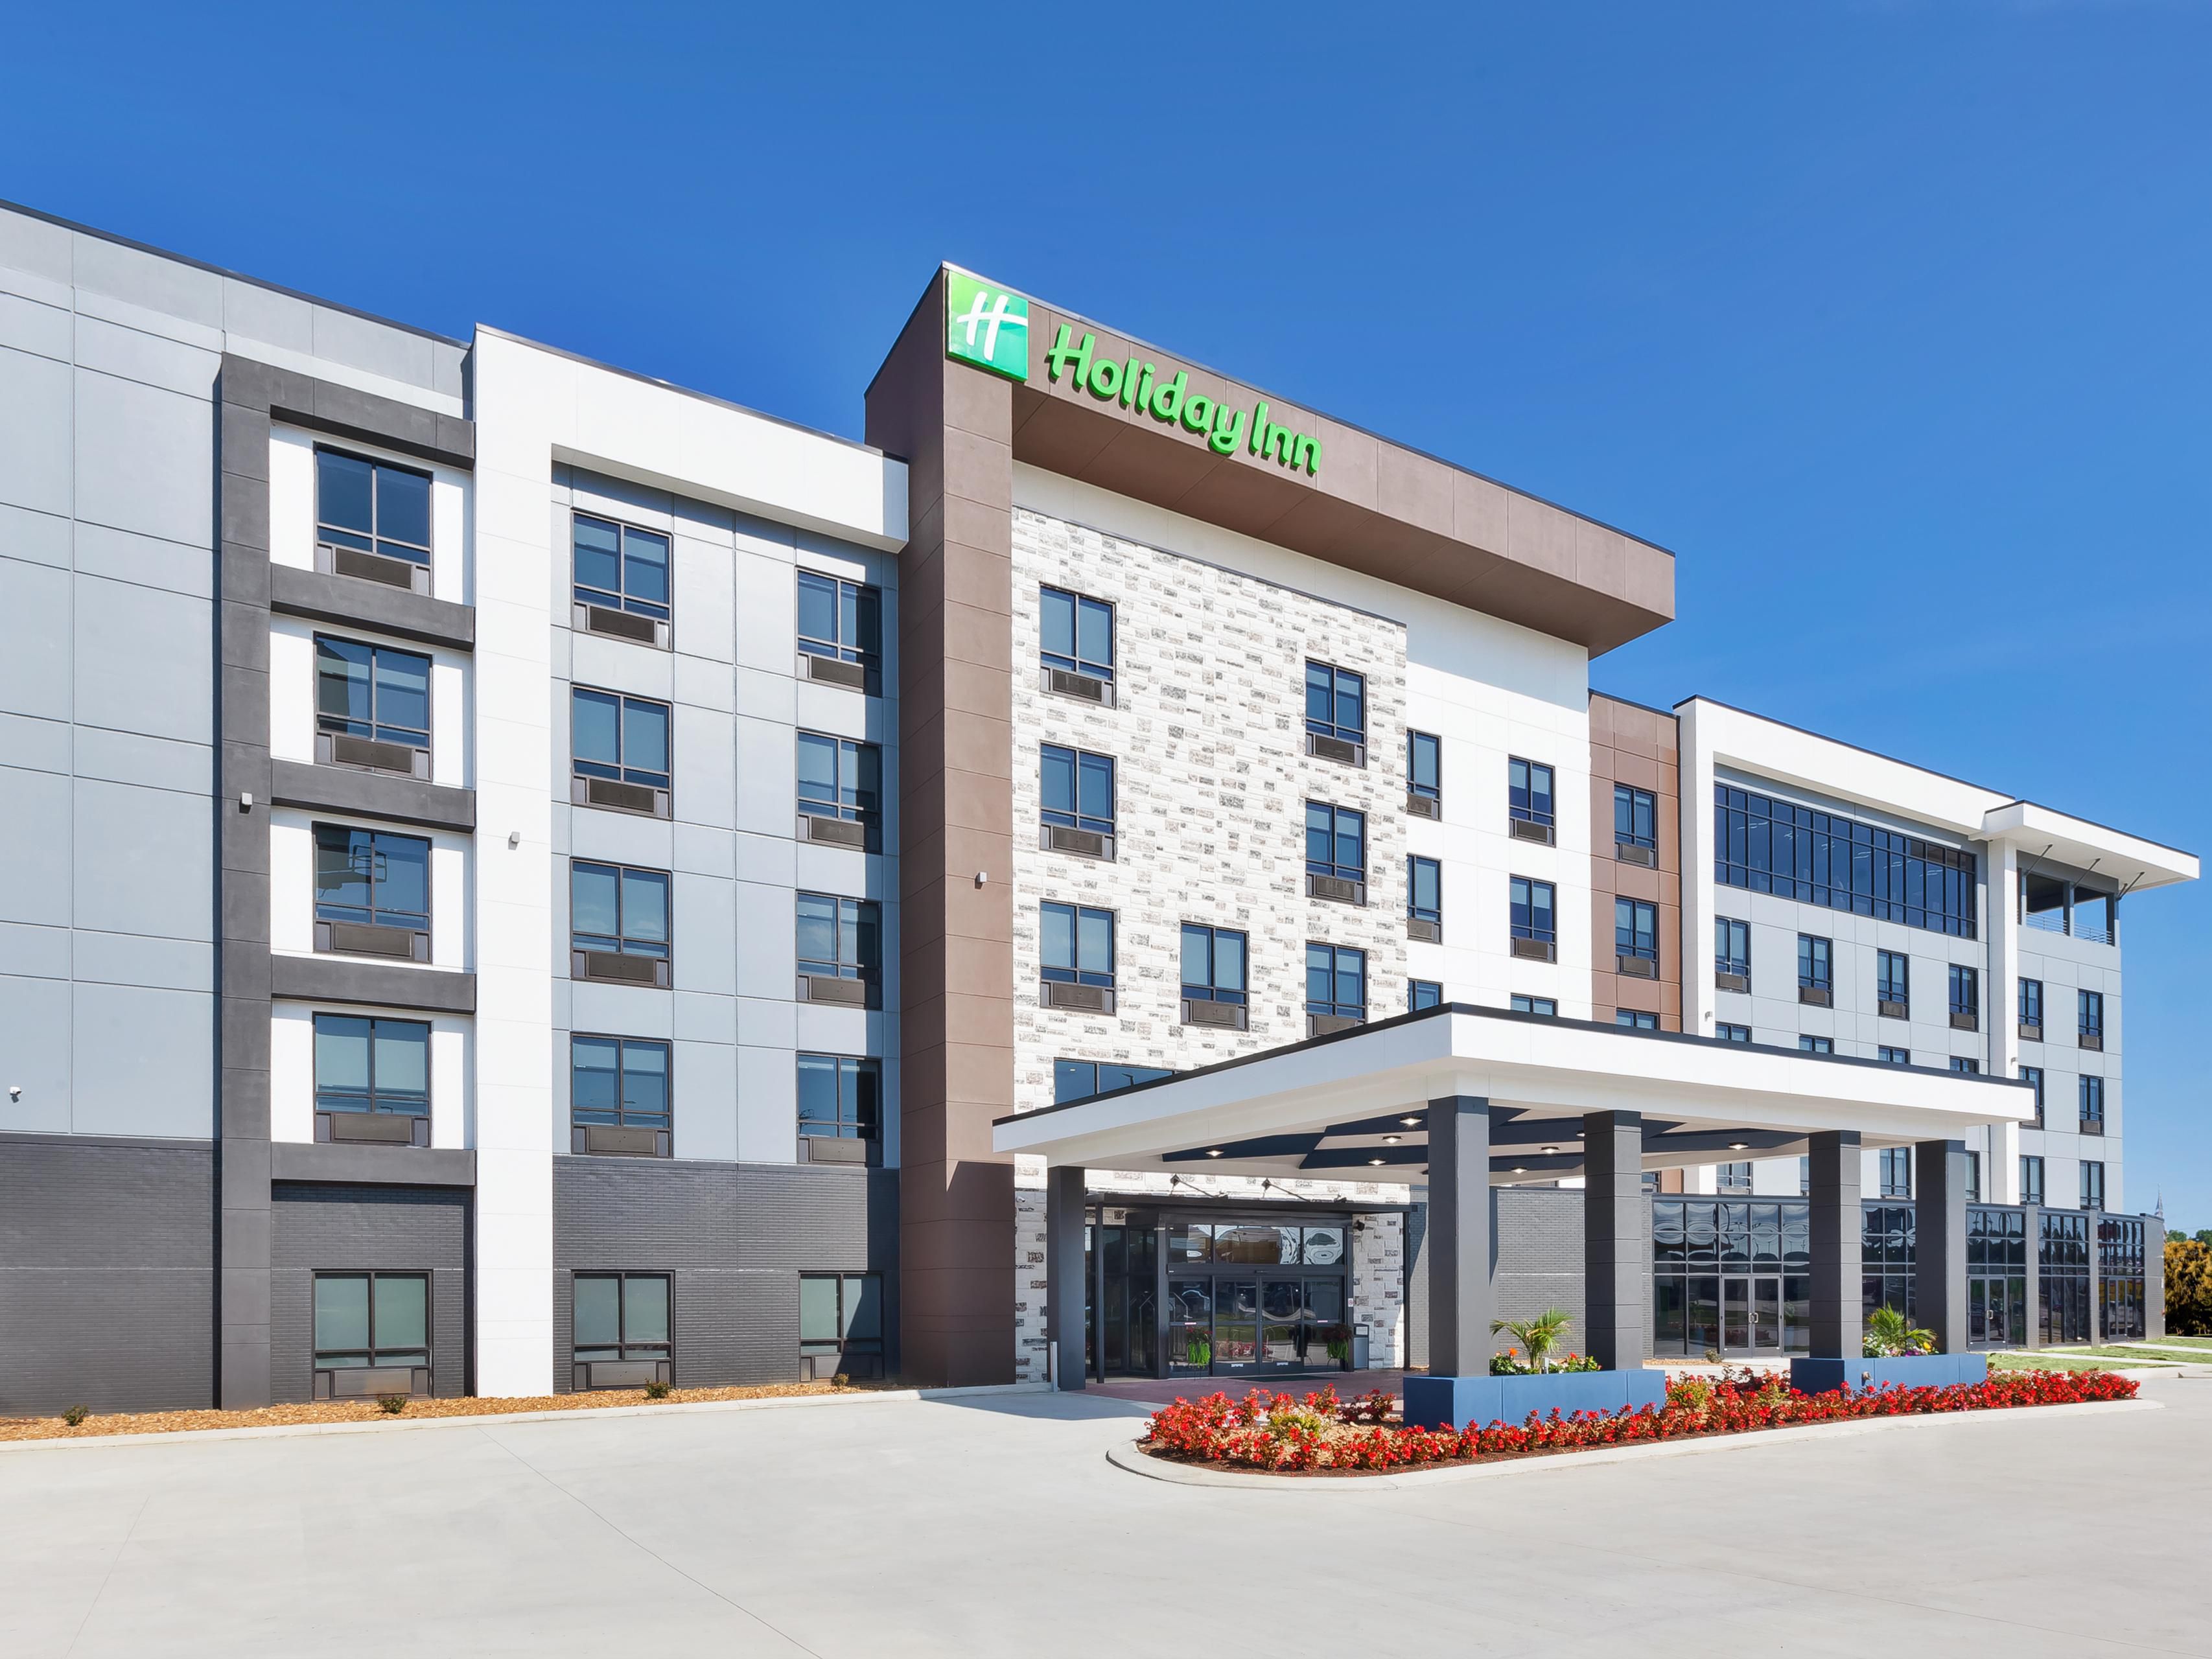 We're the newest hotel in the market. We opened on May 27th, 2021.  We have all the amenities to make your stay comfortable and fun. Enjoy a delicious dinner and drinks on our rooftop bar or just relax in your brand new guest room. We've got you covered. We look forward to hosting you.